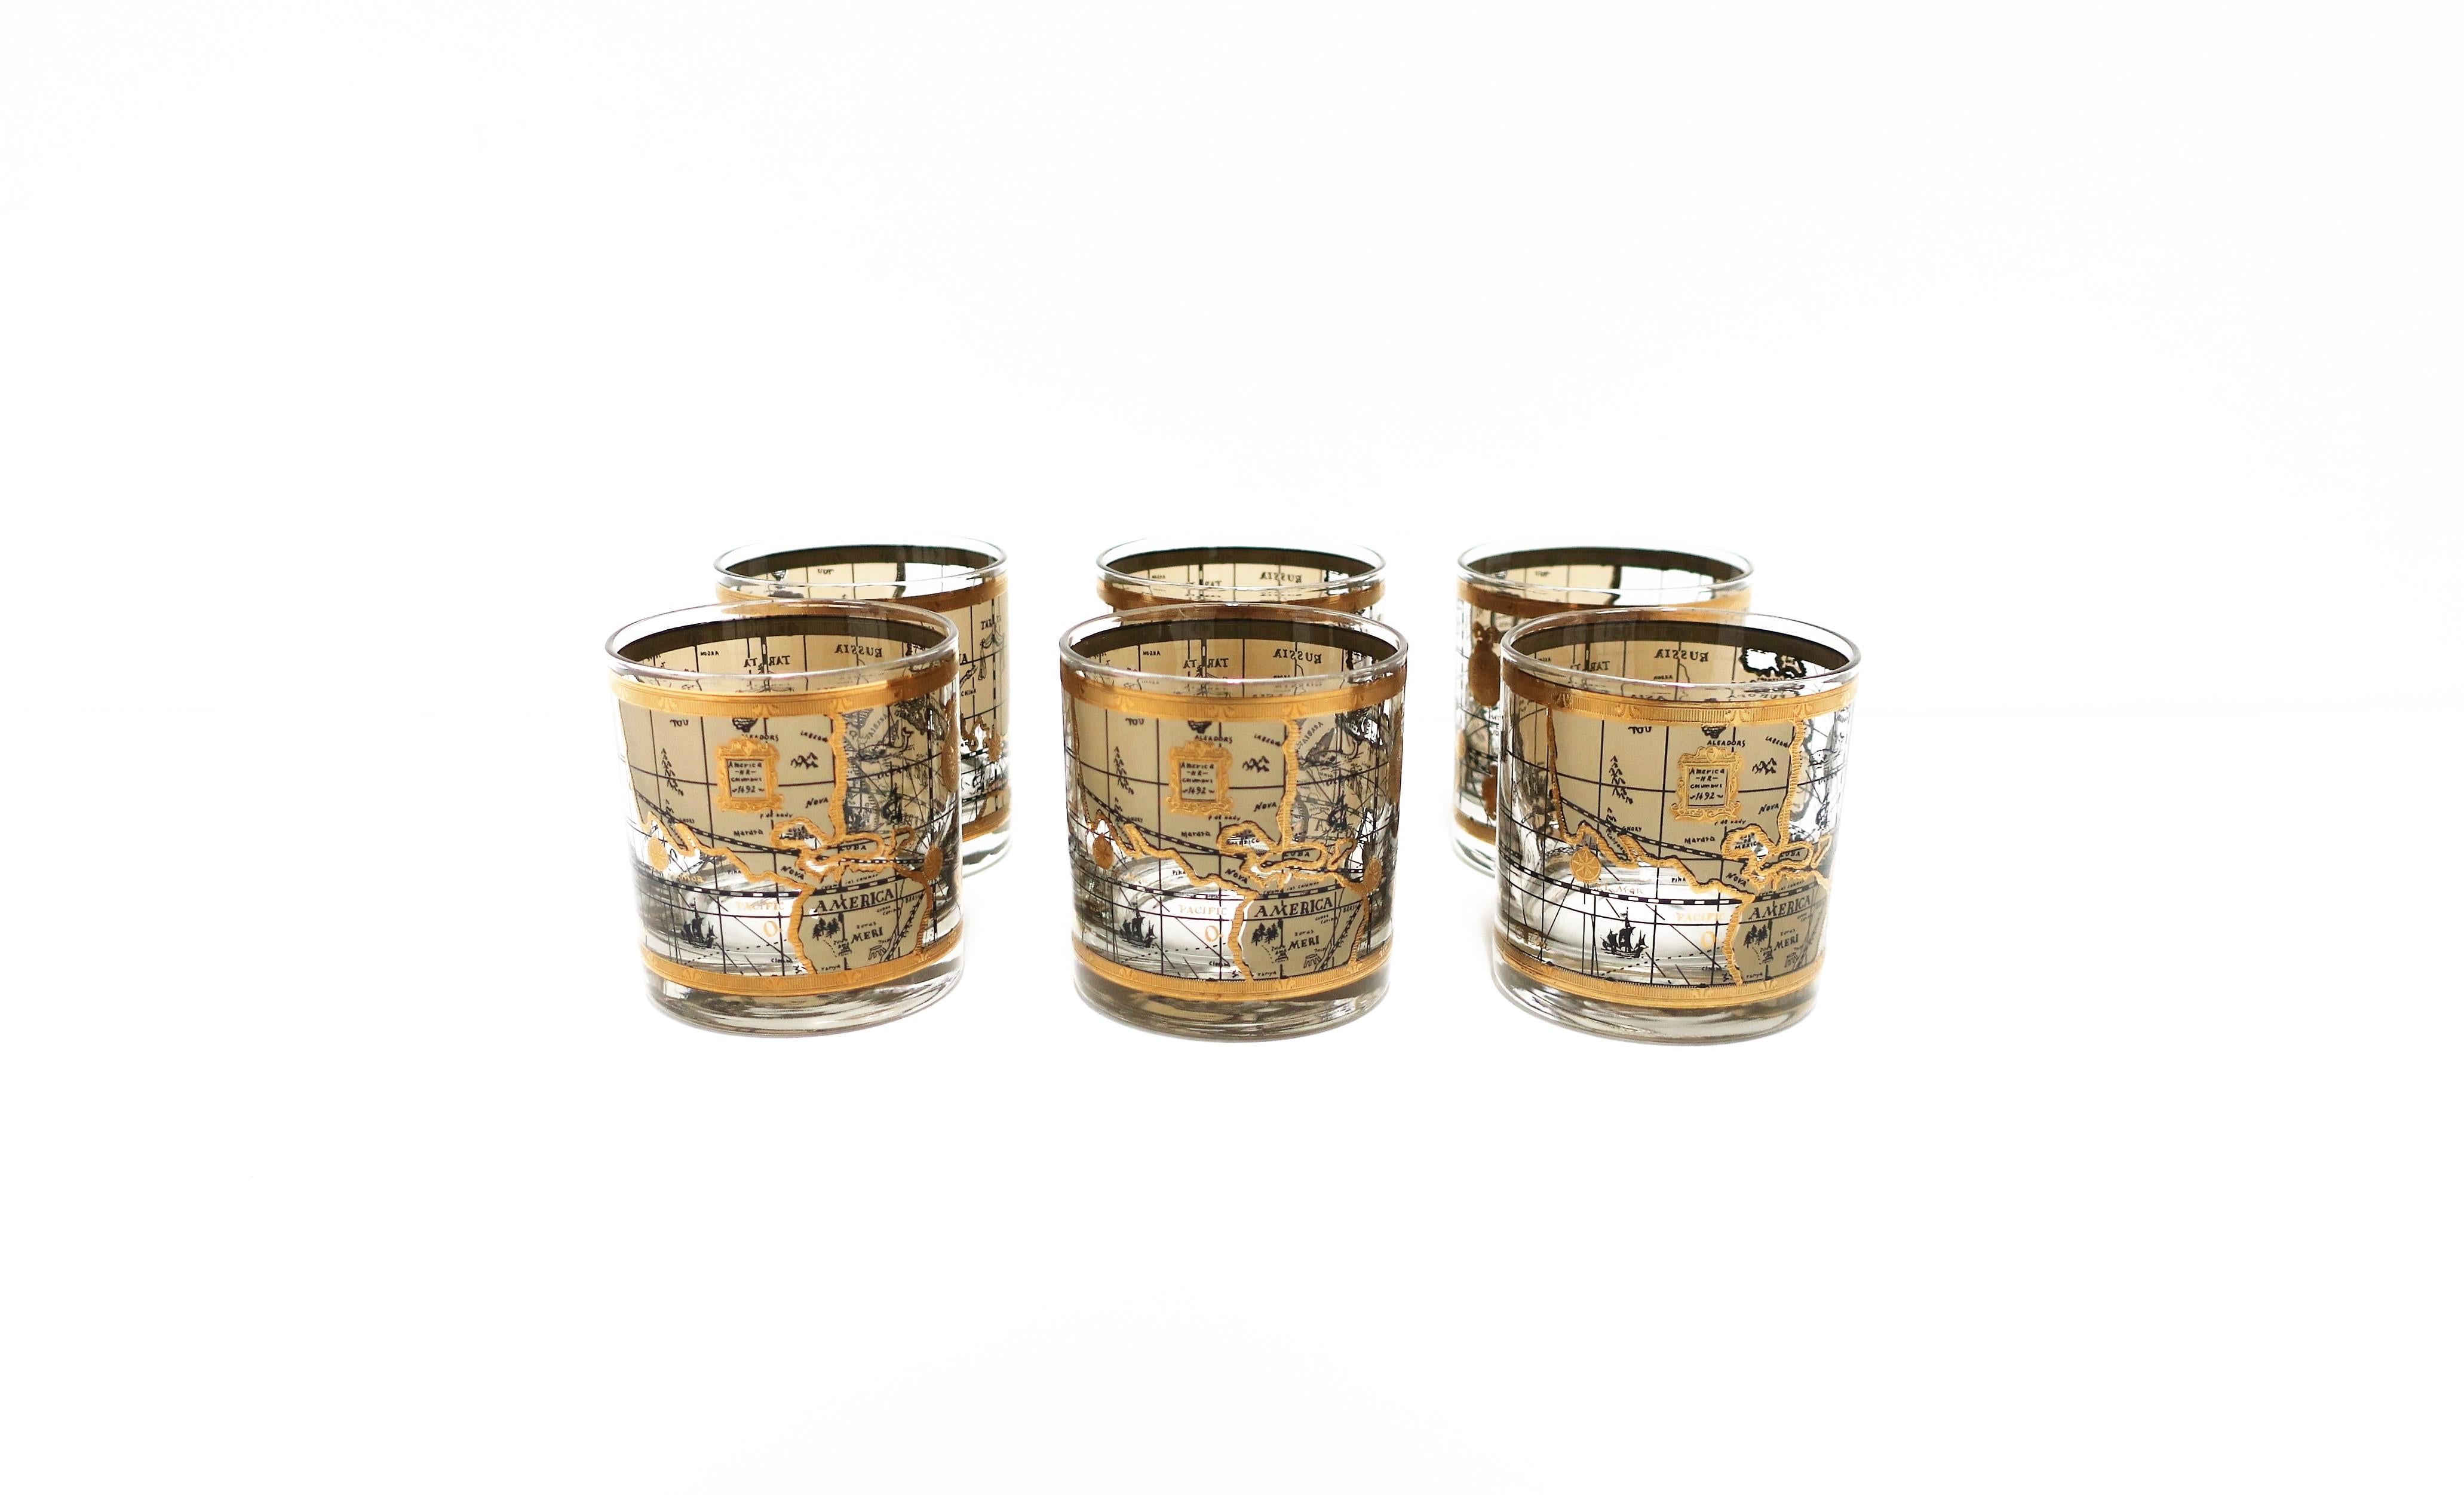 A set of size (6) mid-20th century world globe rocks' glasses, circa 1960s, USA. Beautiful glasses with a raised relief of the world map in black and gold. Dimensions: 2.88